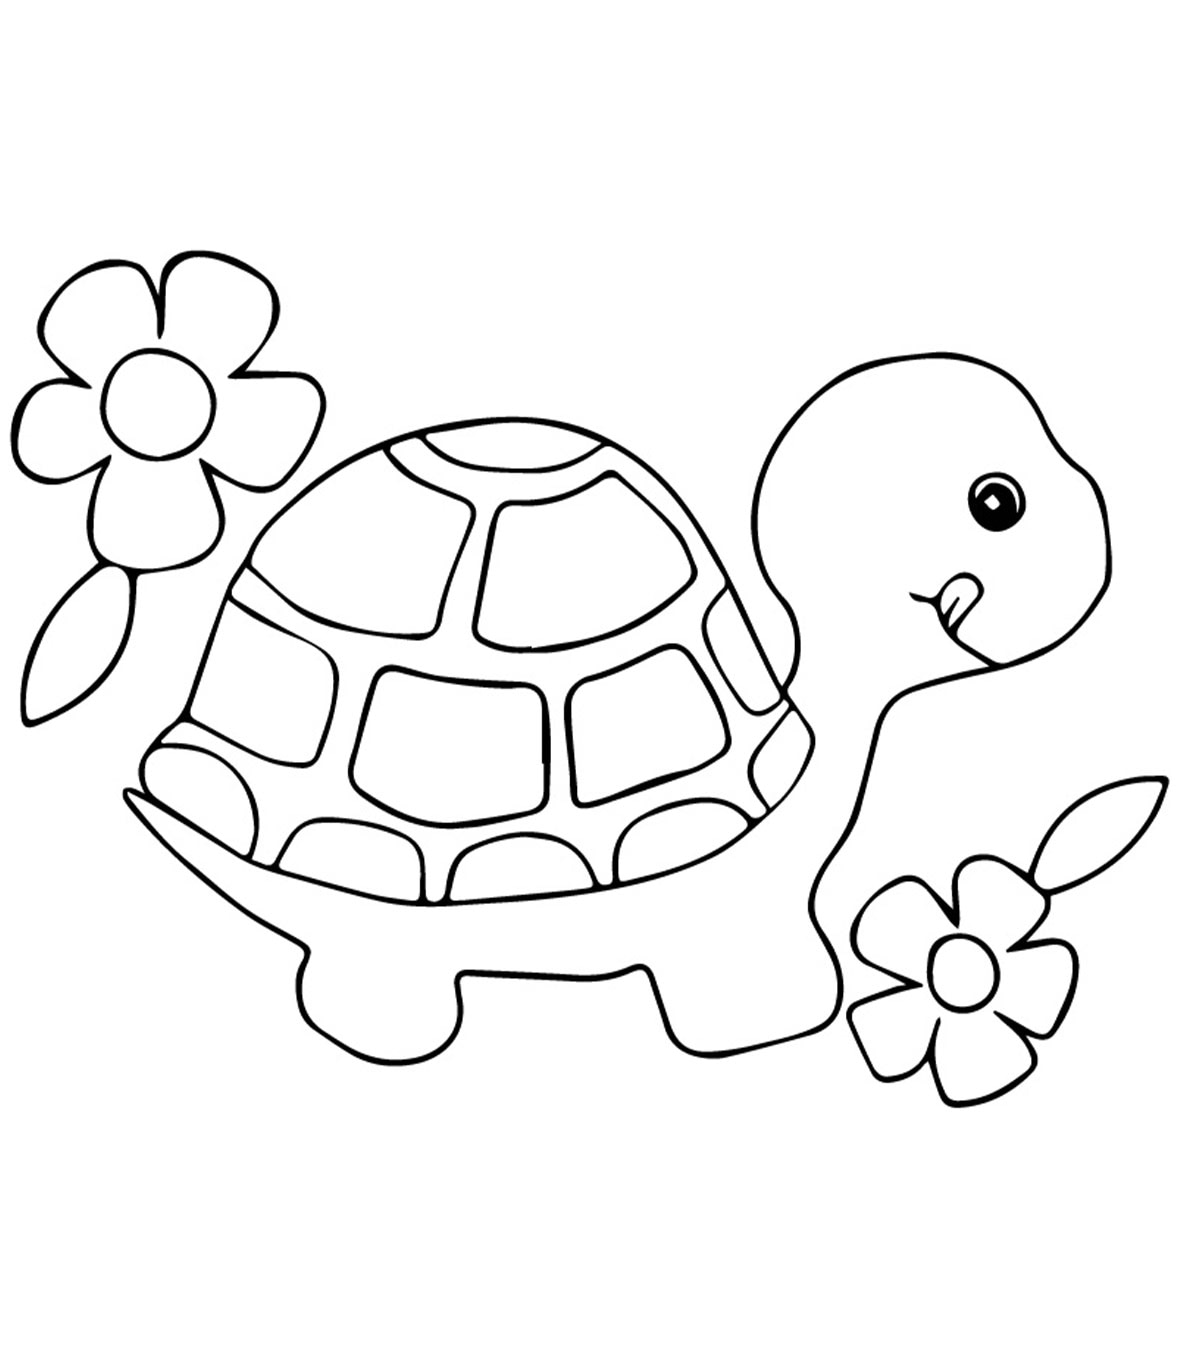 Download Animal Coloring Pages - MomJunction